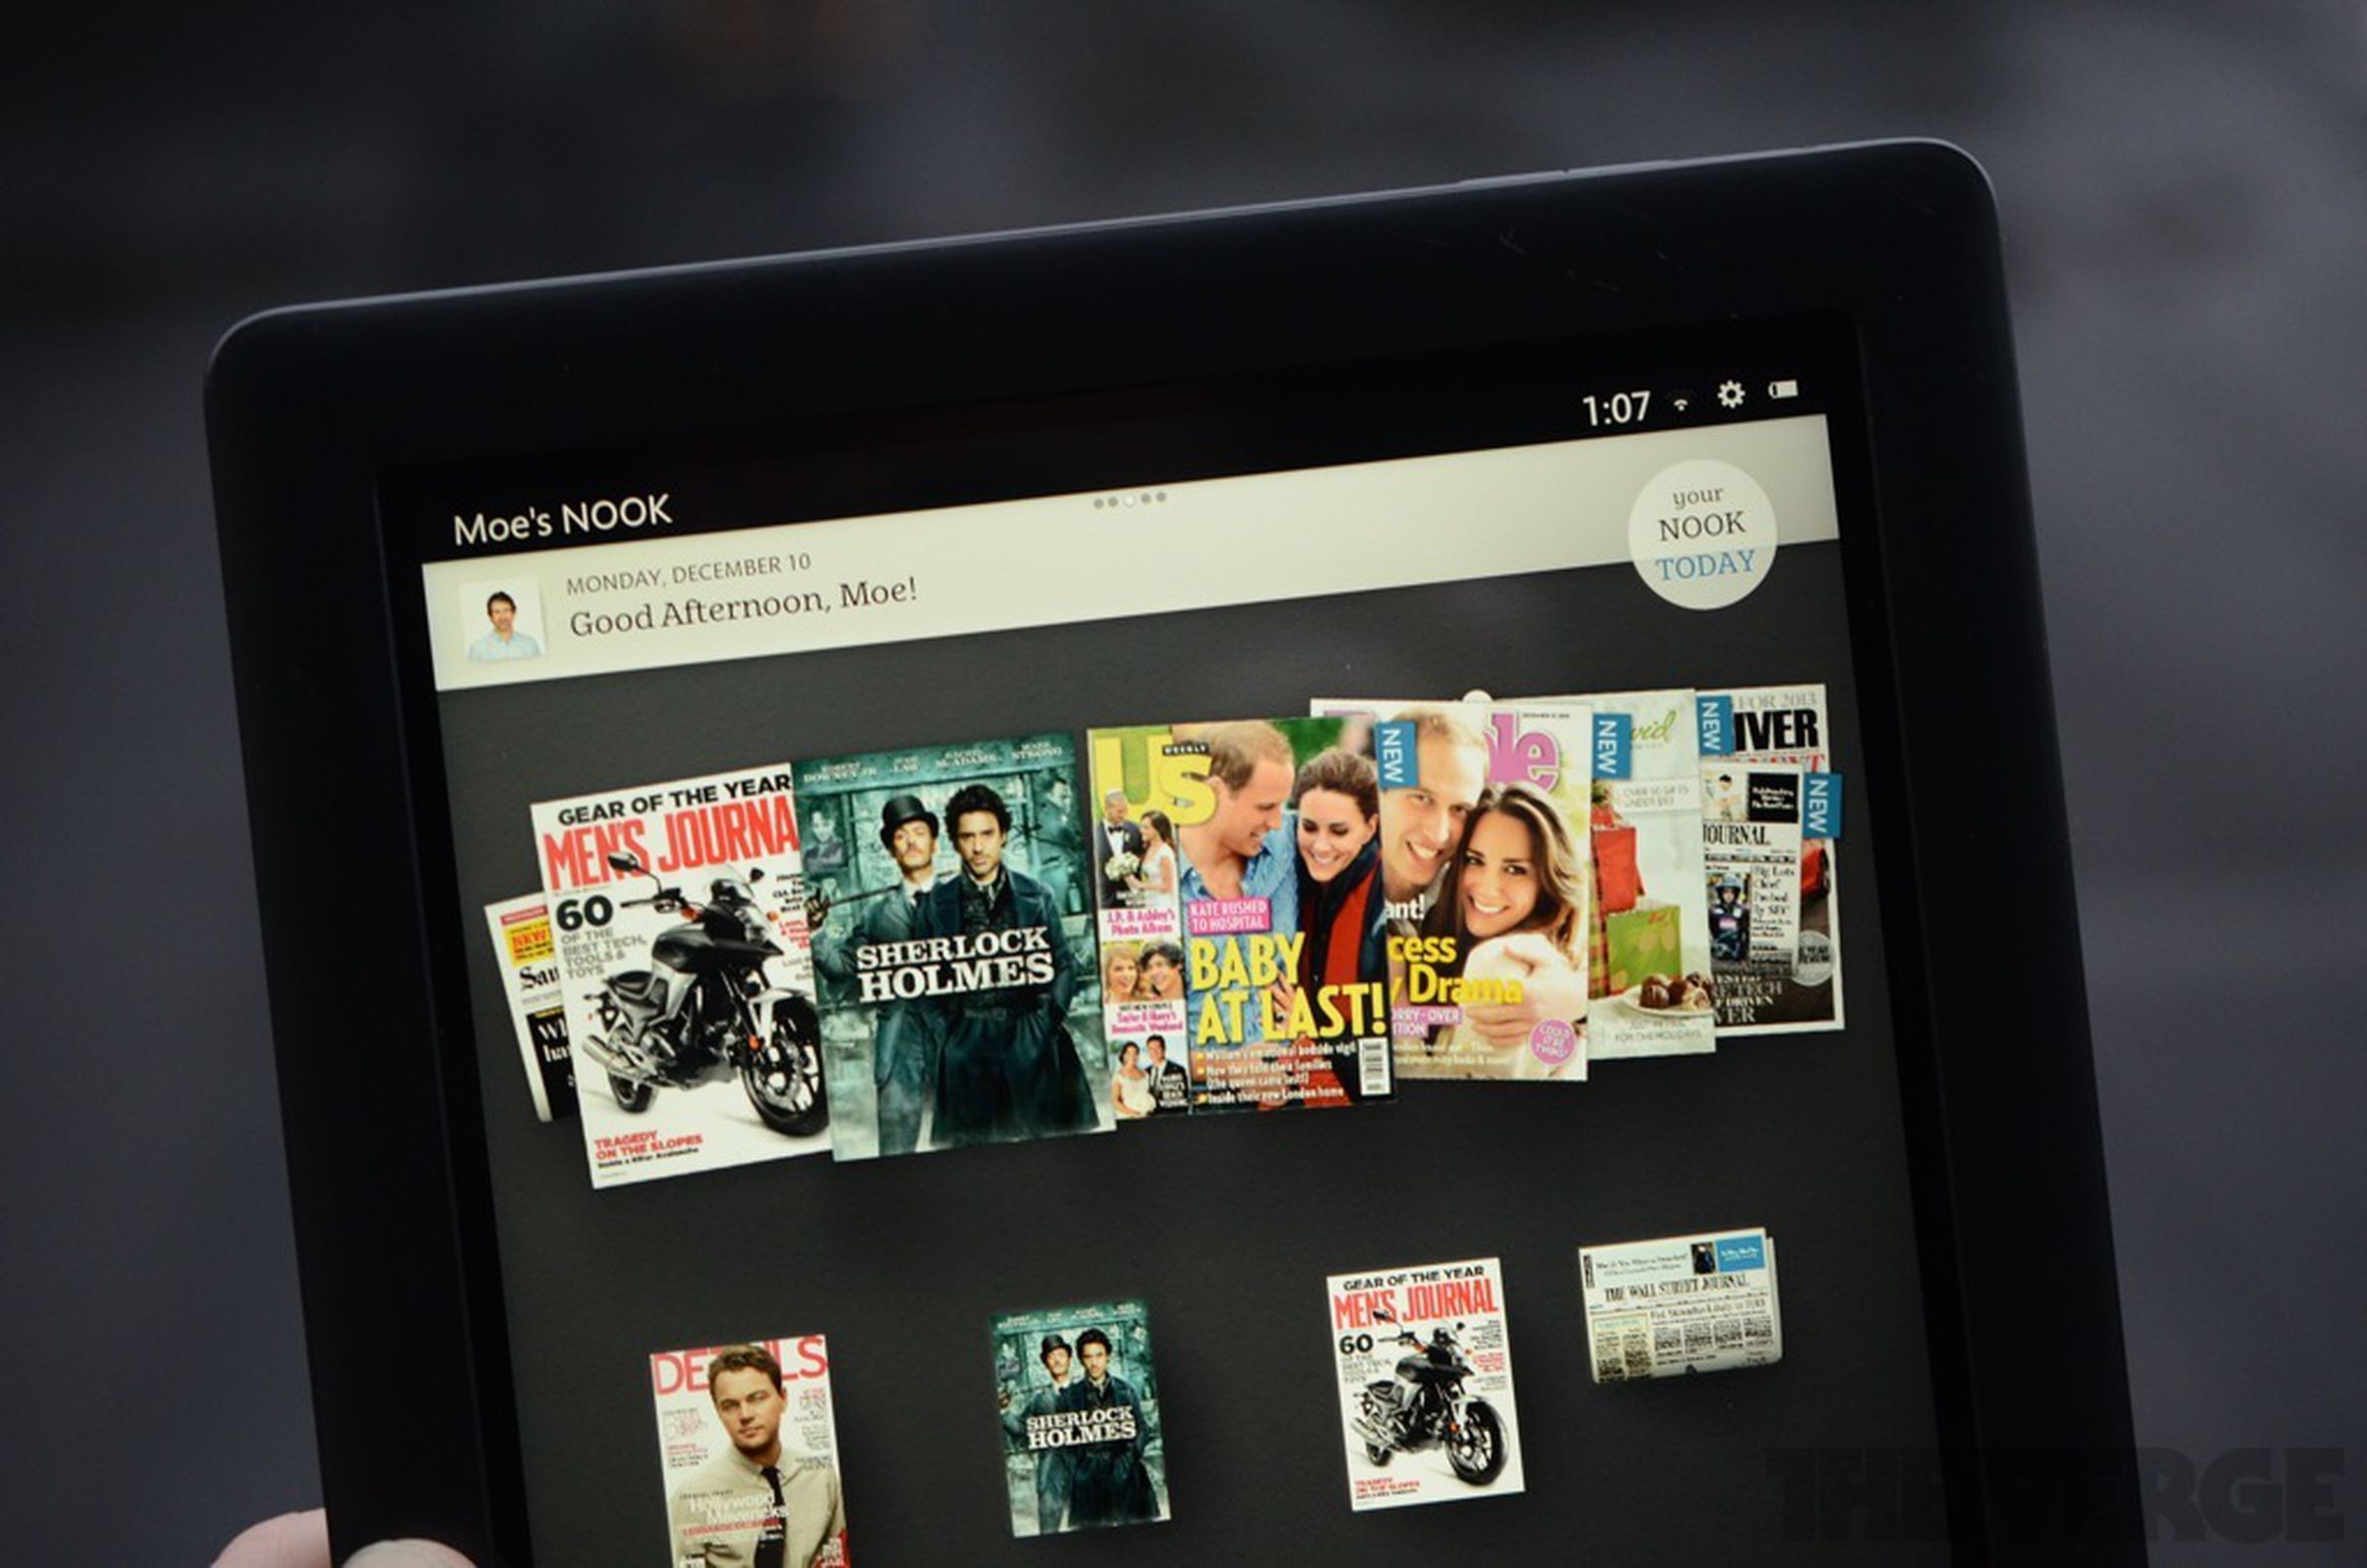 Barnes & Noble Nook HD+ hands-on pictures